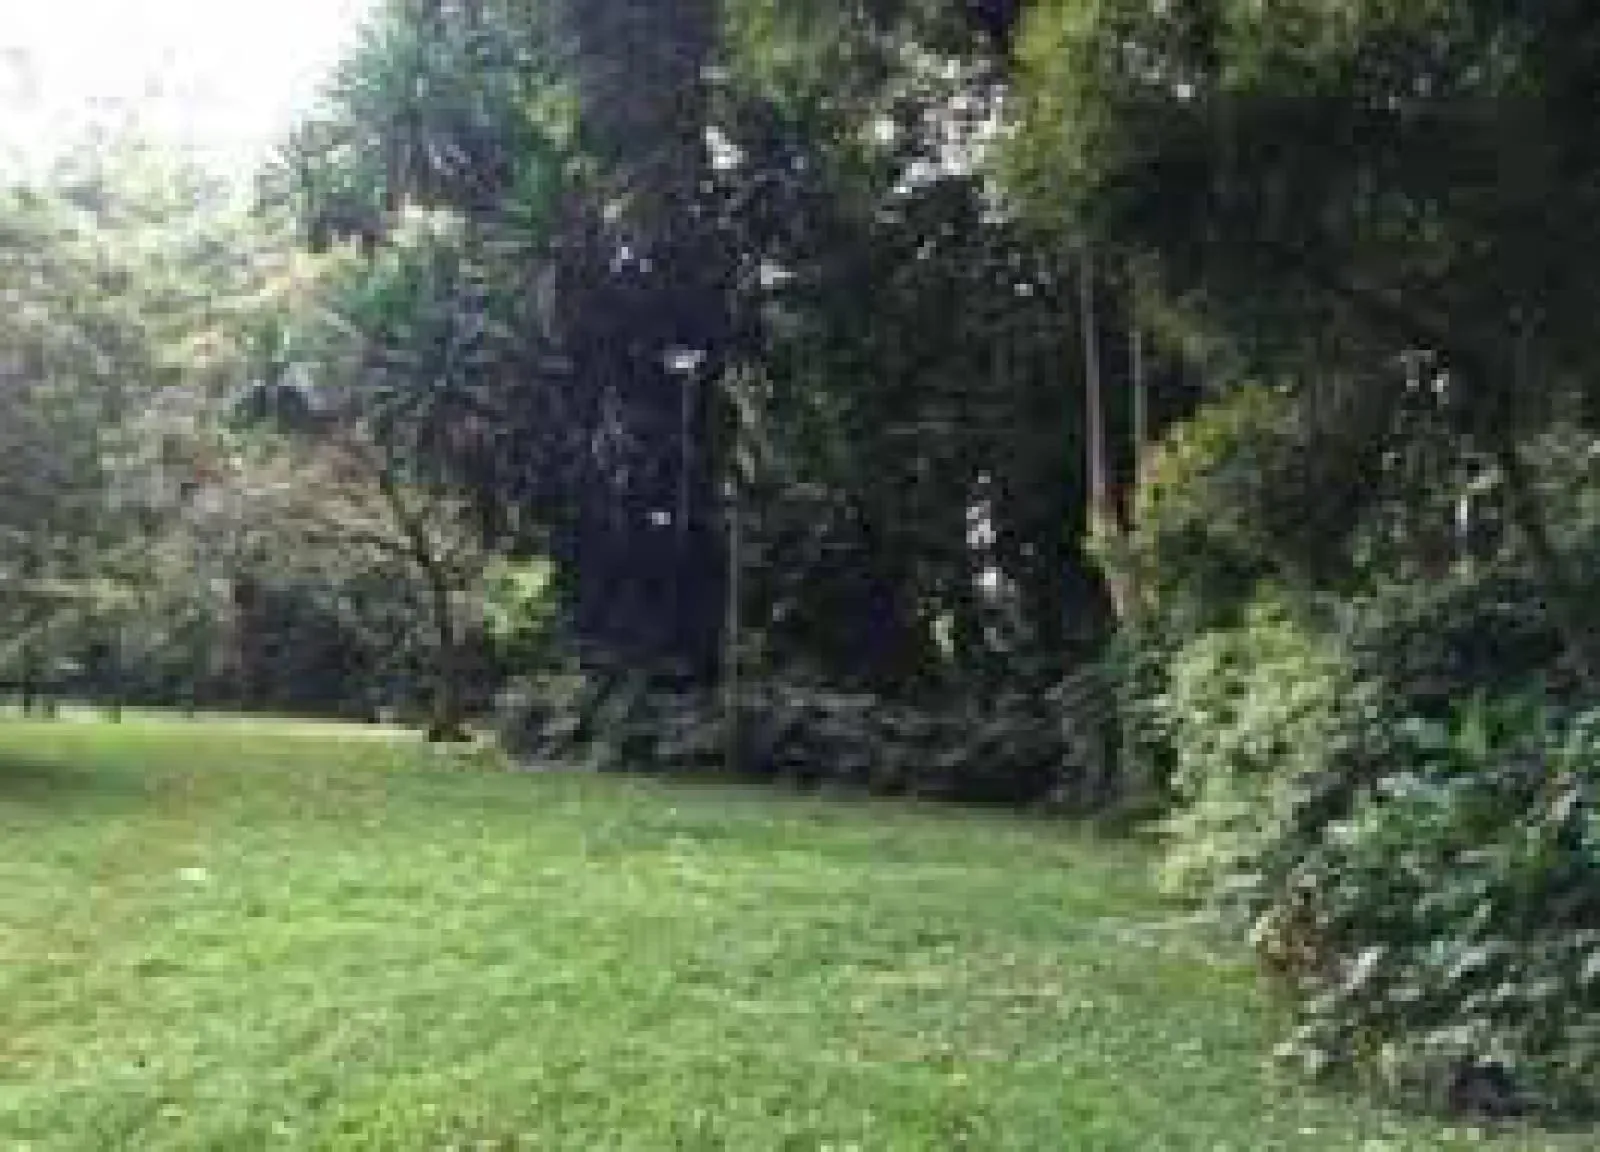 Land for sale in Karen 50 ACRES at Karen Shopping Center Ready Title Deed QUICK SALE 1/2 0.5 acre Exclusive centre 🔥